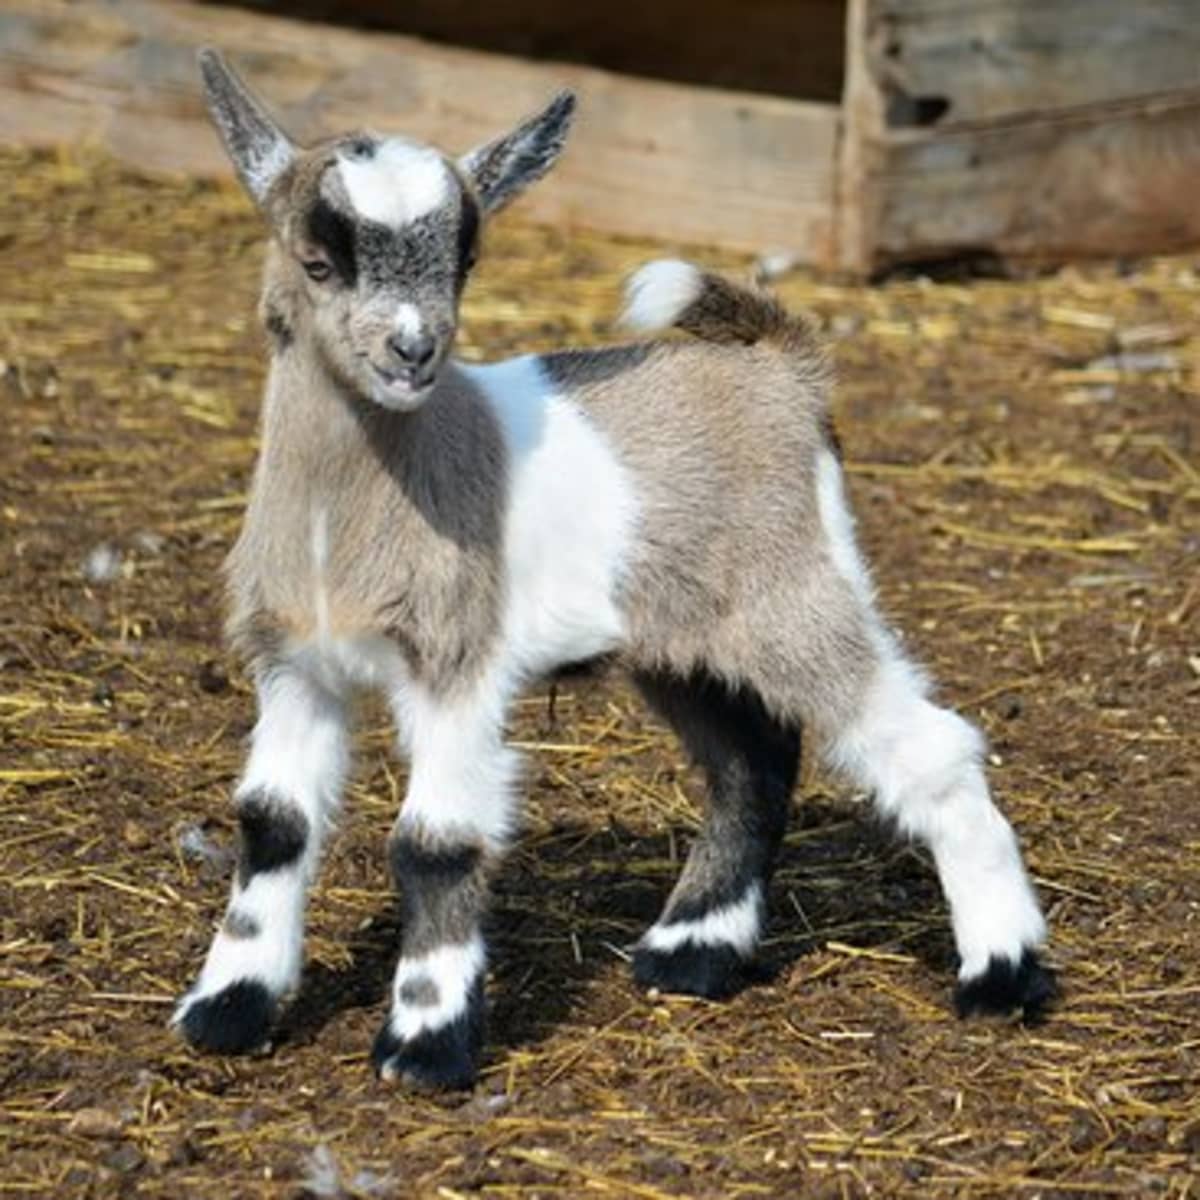 Miniature Farm Animals: Pygmy Goats, Micro Pigs, and More - PetHelpful